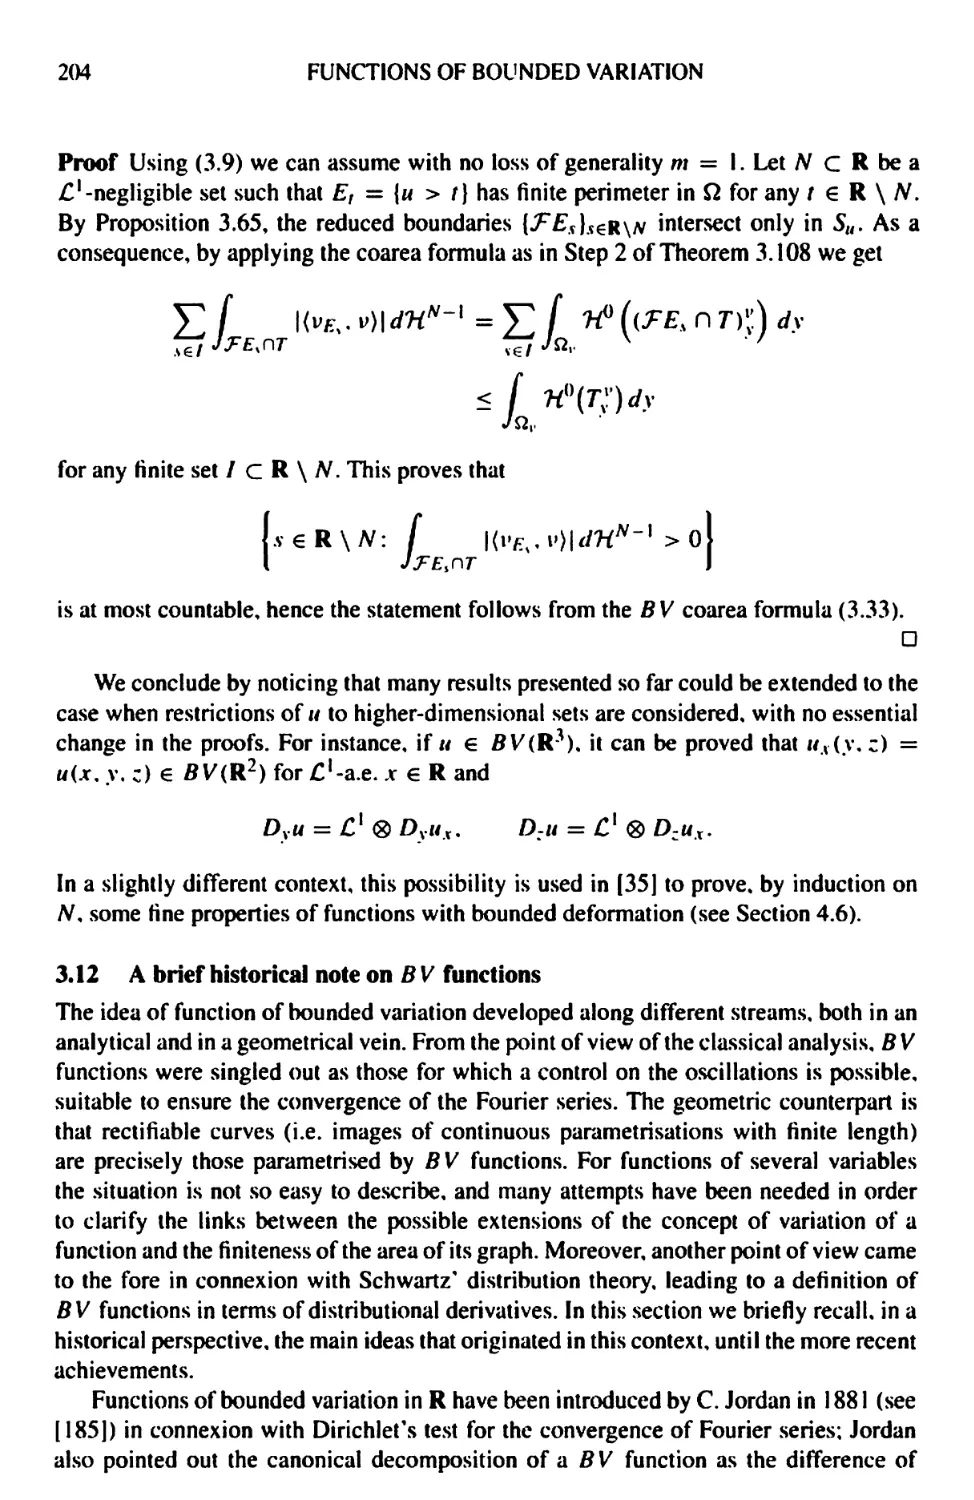 3.12 A brief historical note on BV functions